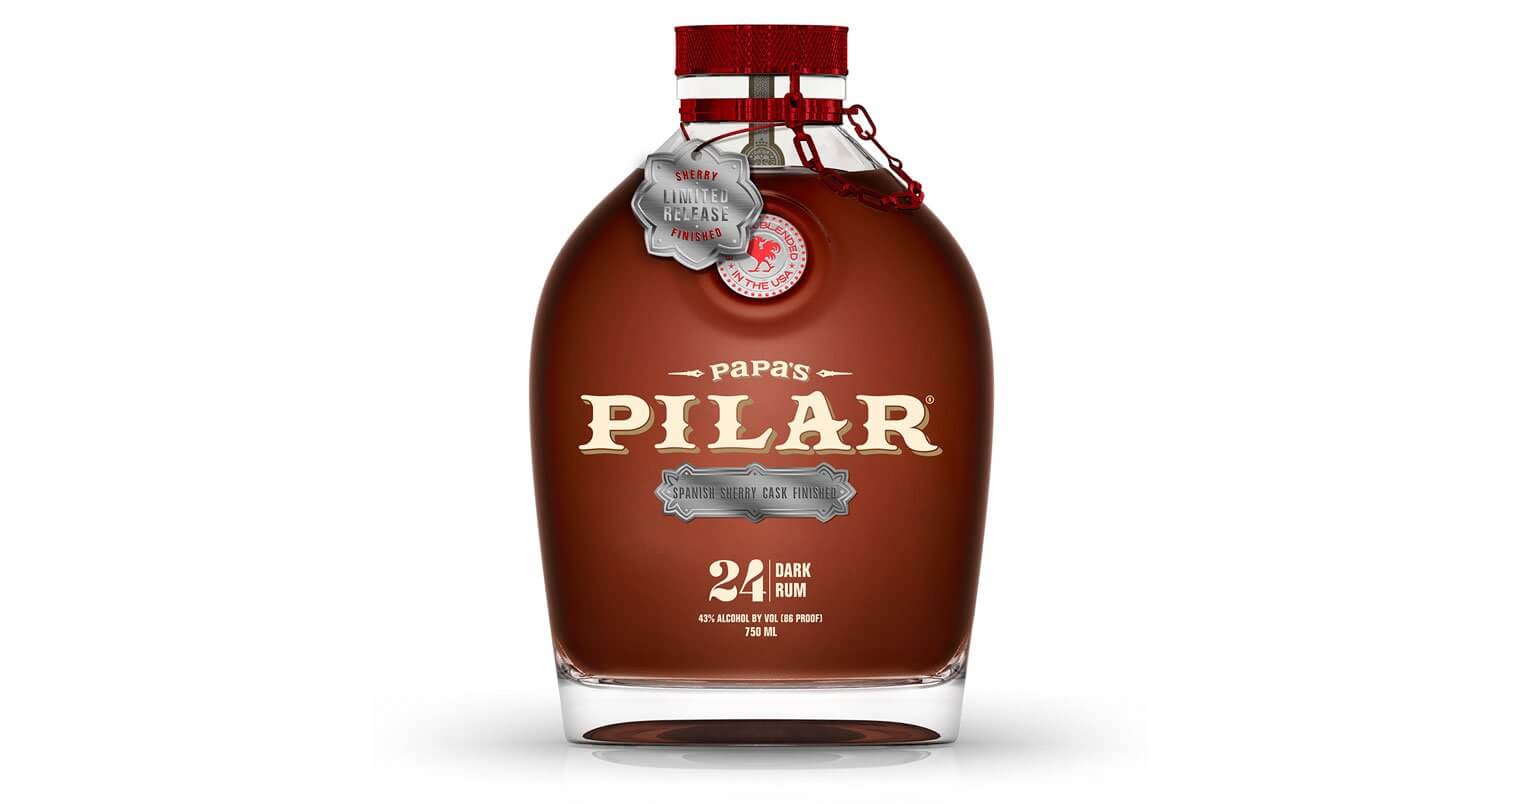 Papa's Pilar Sherry Finish Launches, featured image